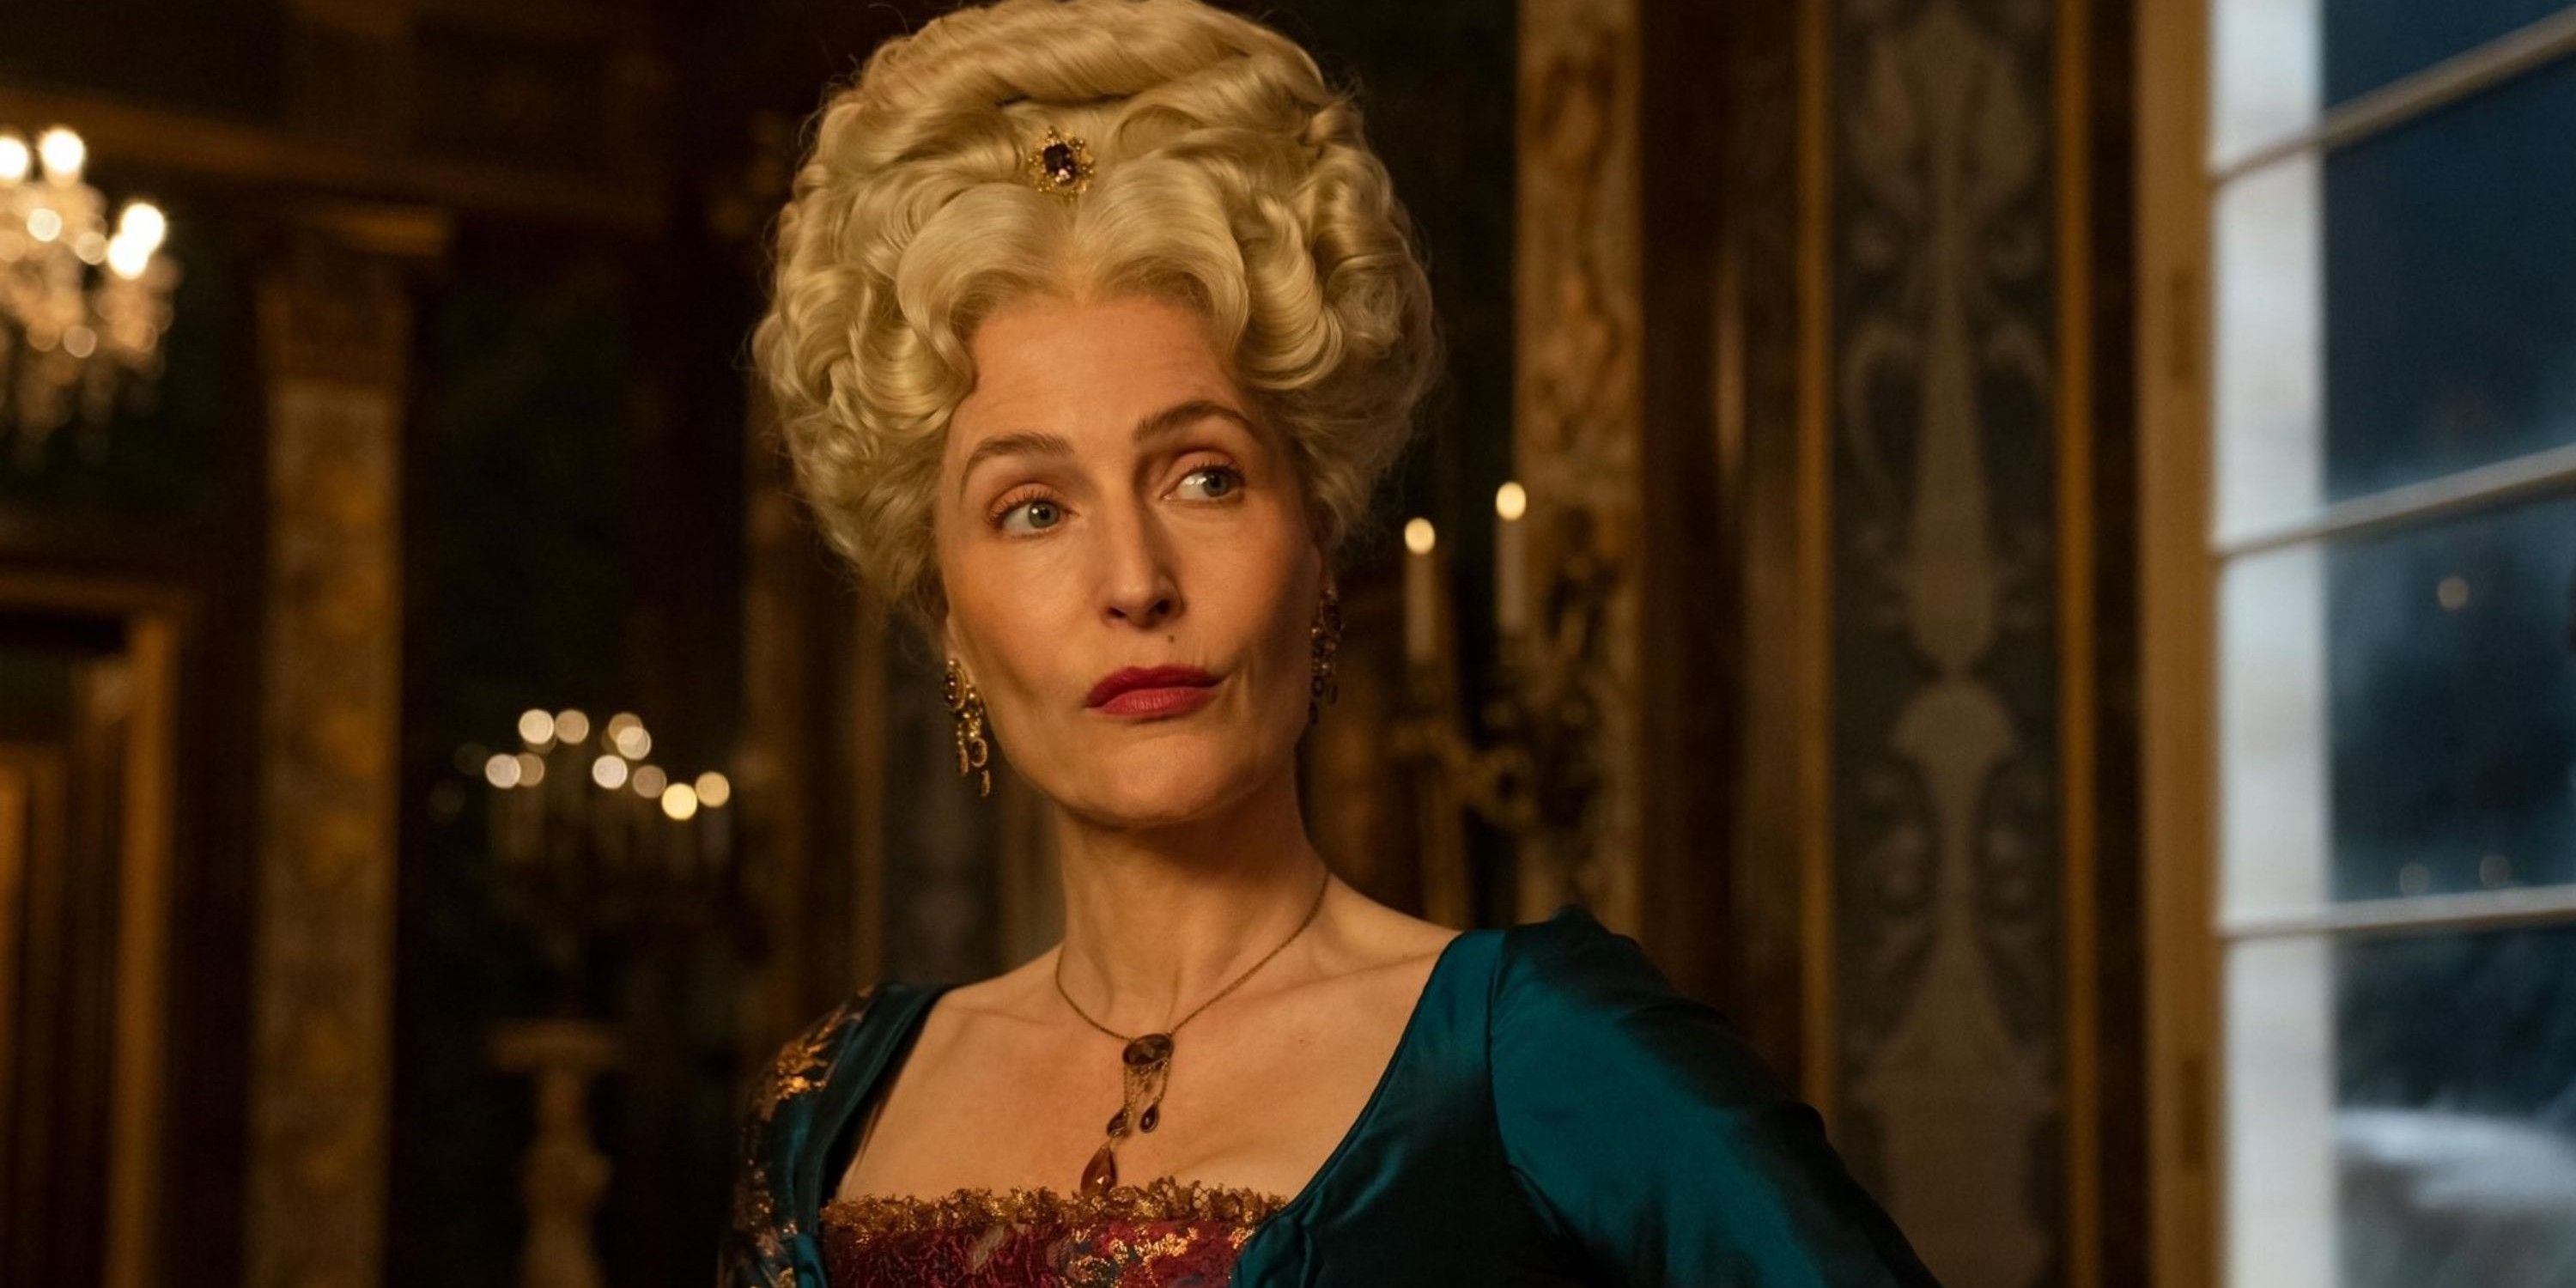 Joanna played by Gillian Anderson in The Great